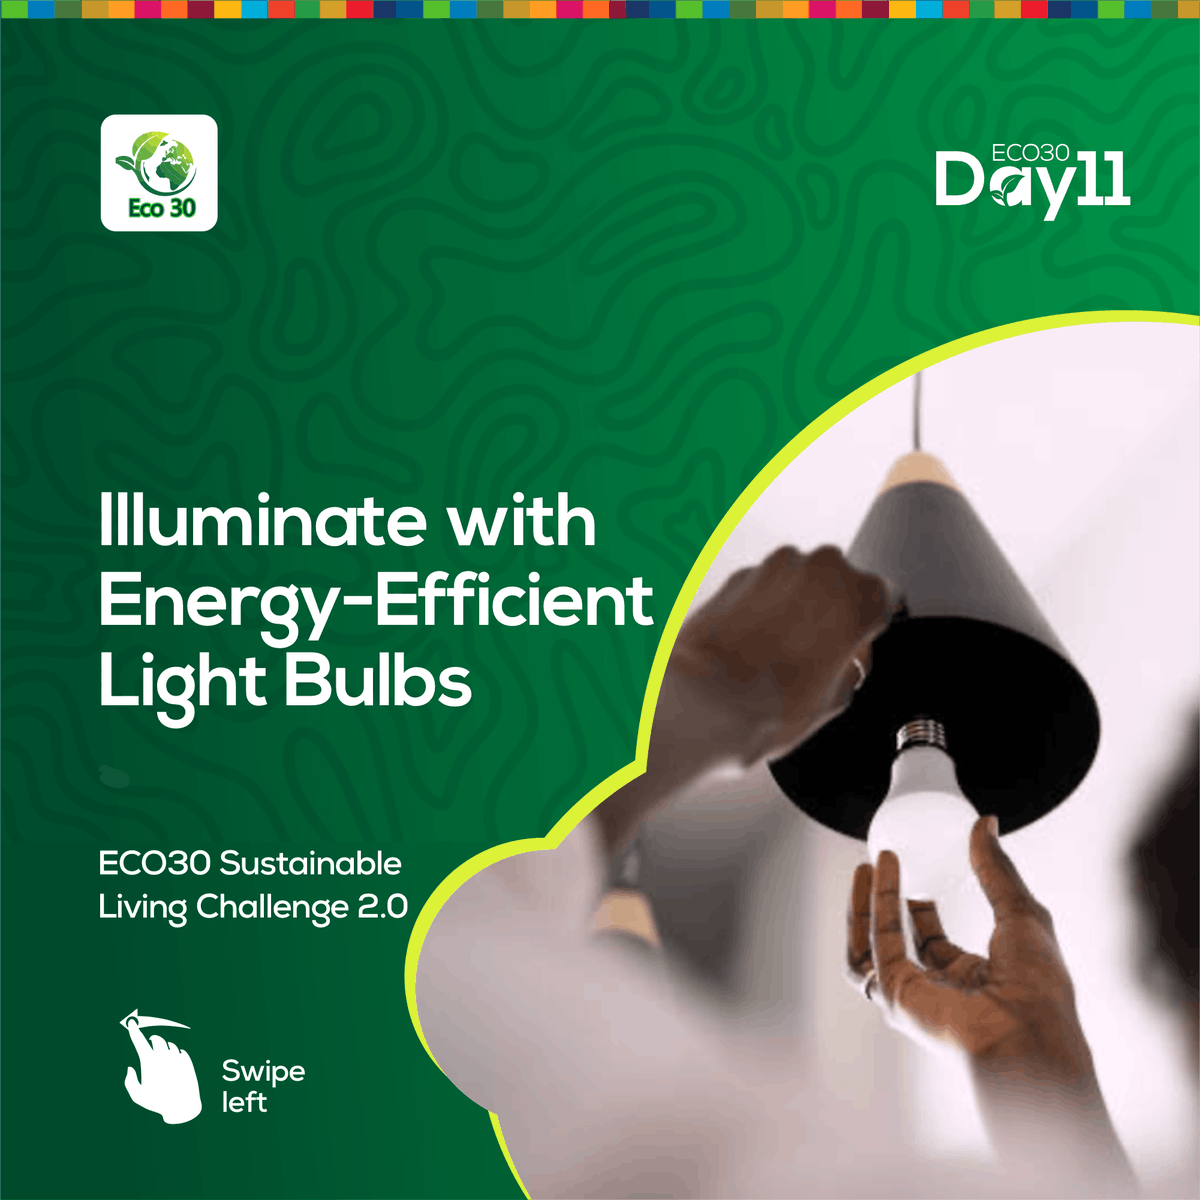 By using energy-efficient light bulbs, we can brighten our lives while dimming our environmental footprint.
#Eco30impact